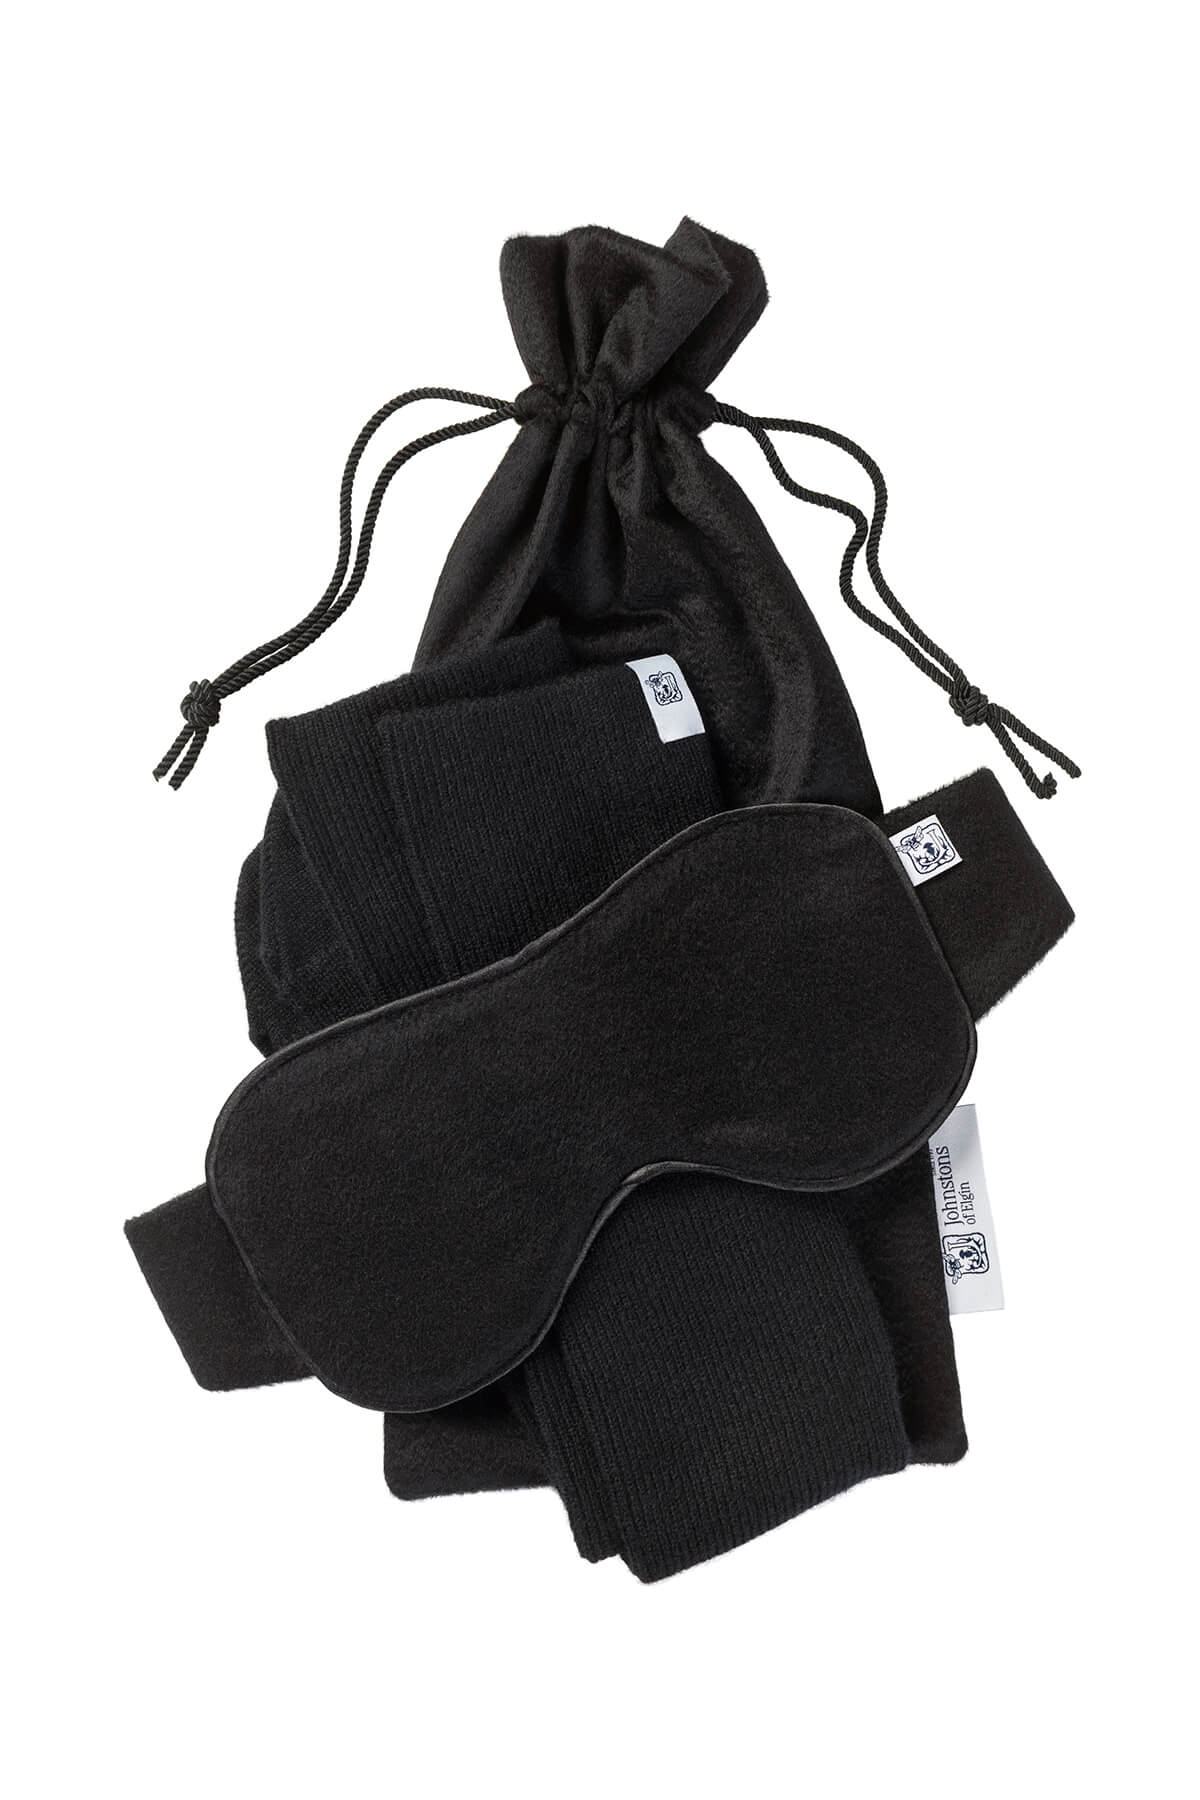 Johnstons of Elgin  Luxury Cashmere Travel Set in Black on a white background PA000094RU6432ONE